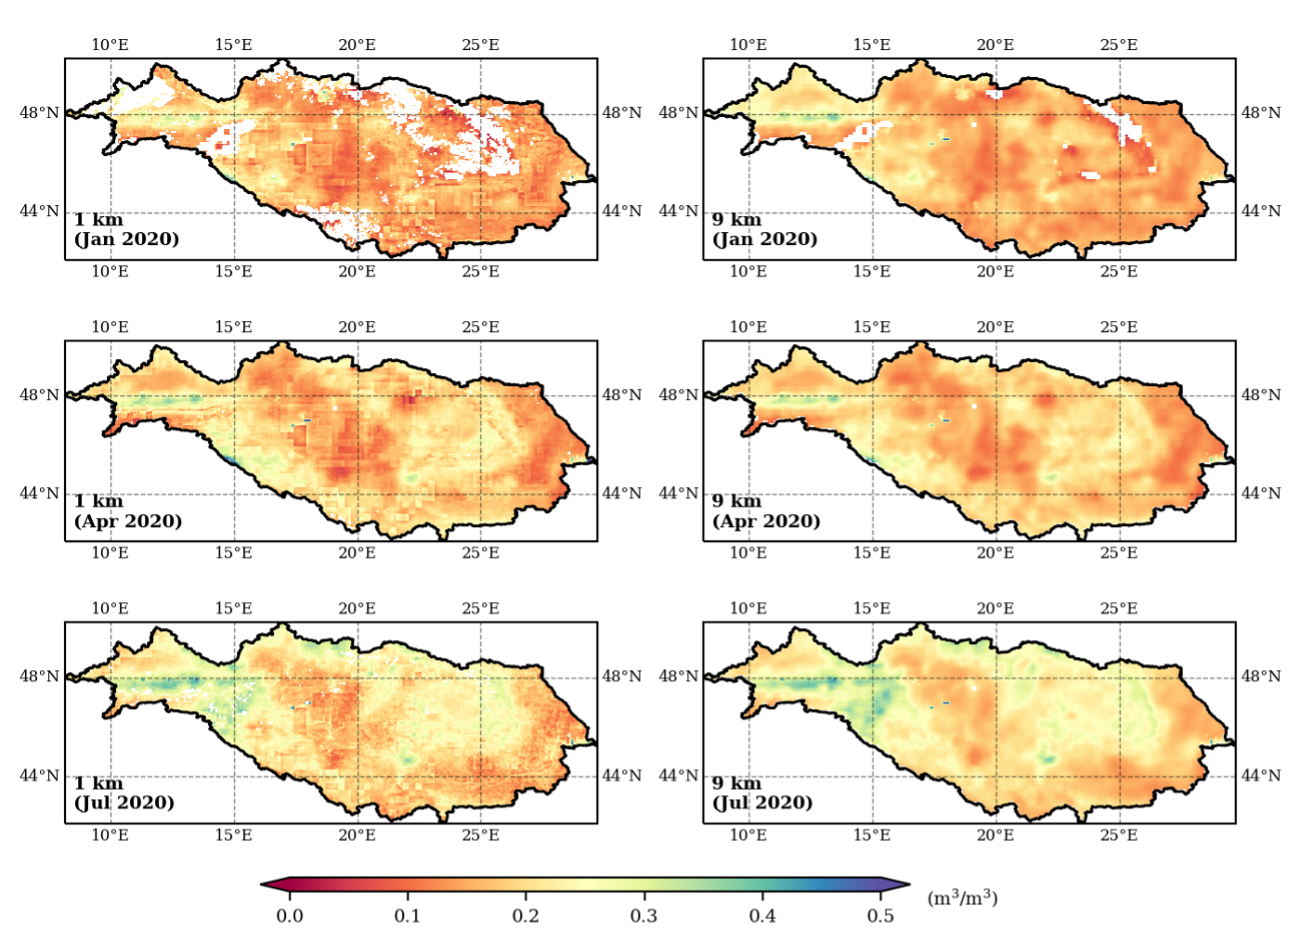 The monthly averaged downscaled 1 km and 9 km SMAP SM of descending overpass (6 a.m.) from 2020 in Danube River basin. (contributed by Bin Fang and Venkat Lakshmi)